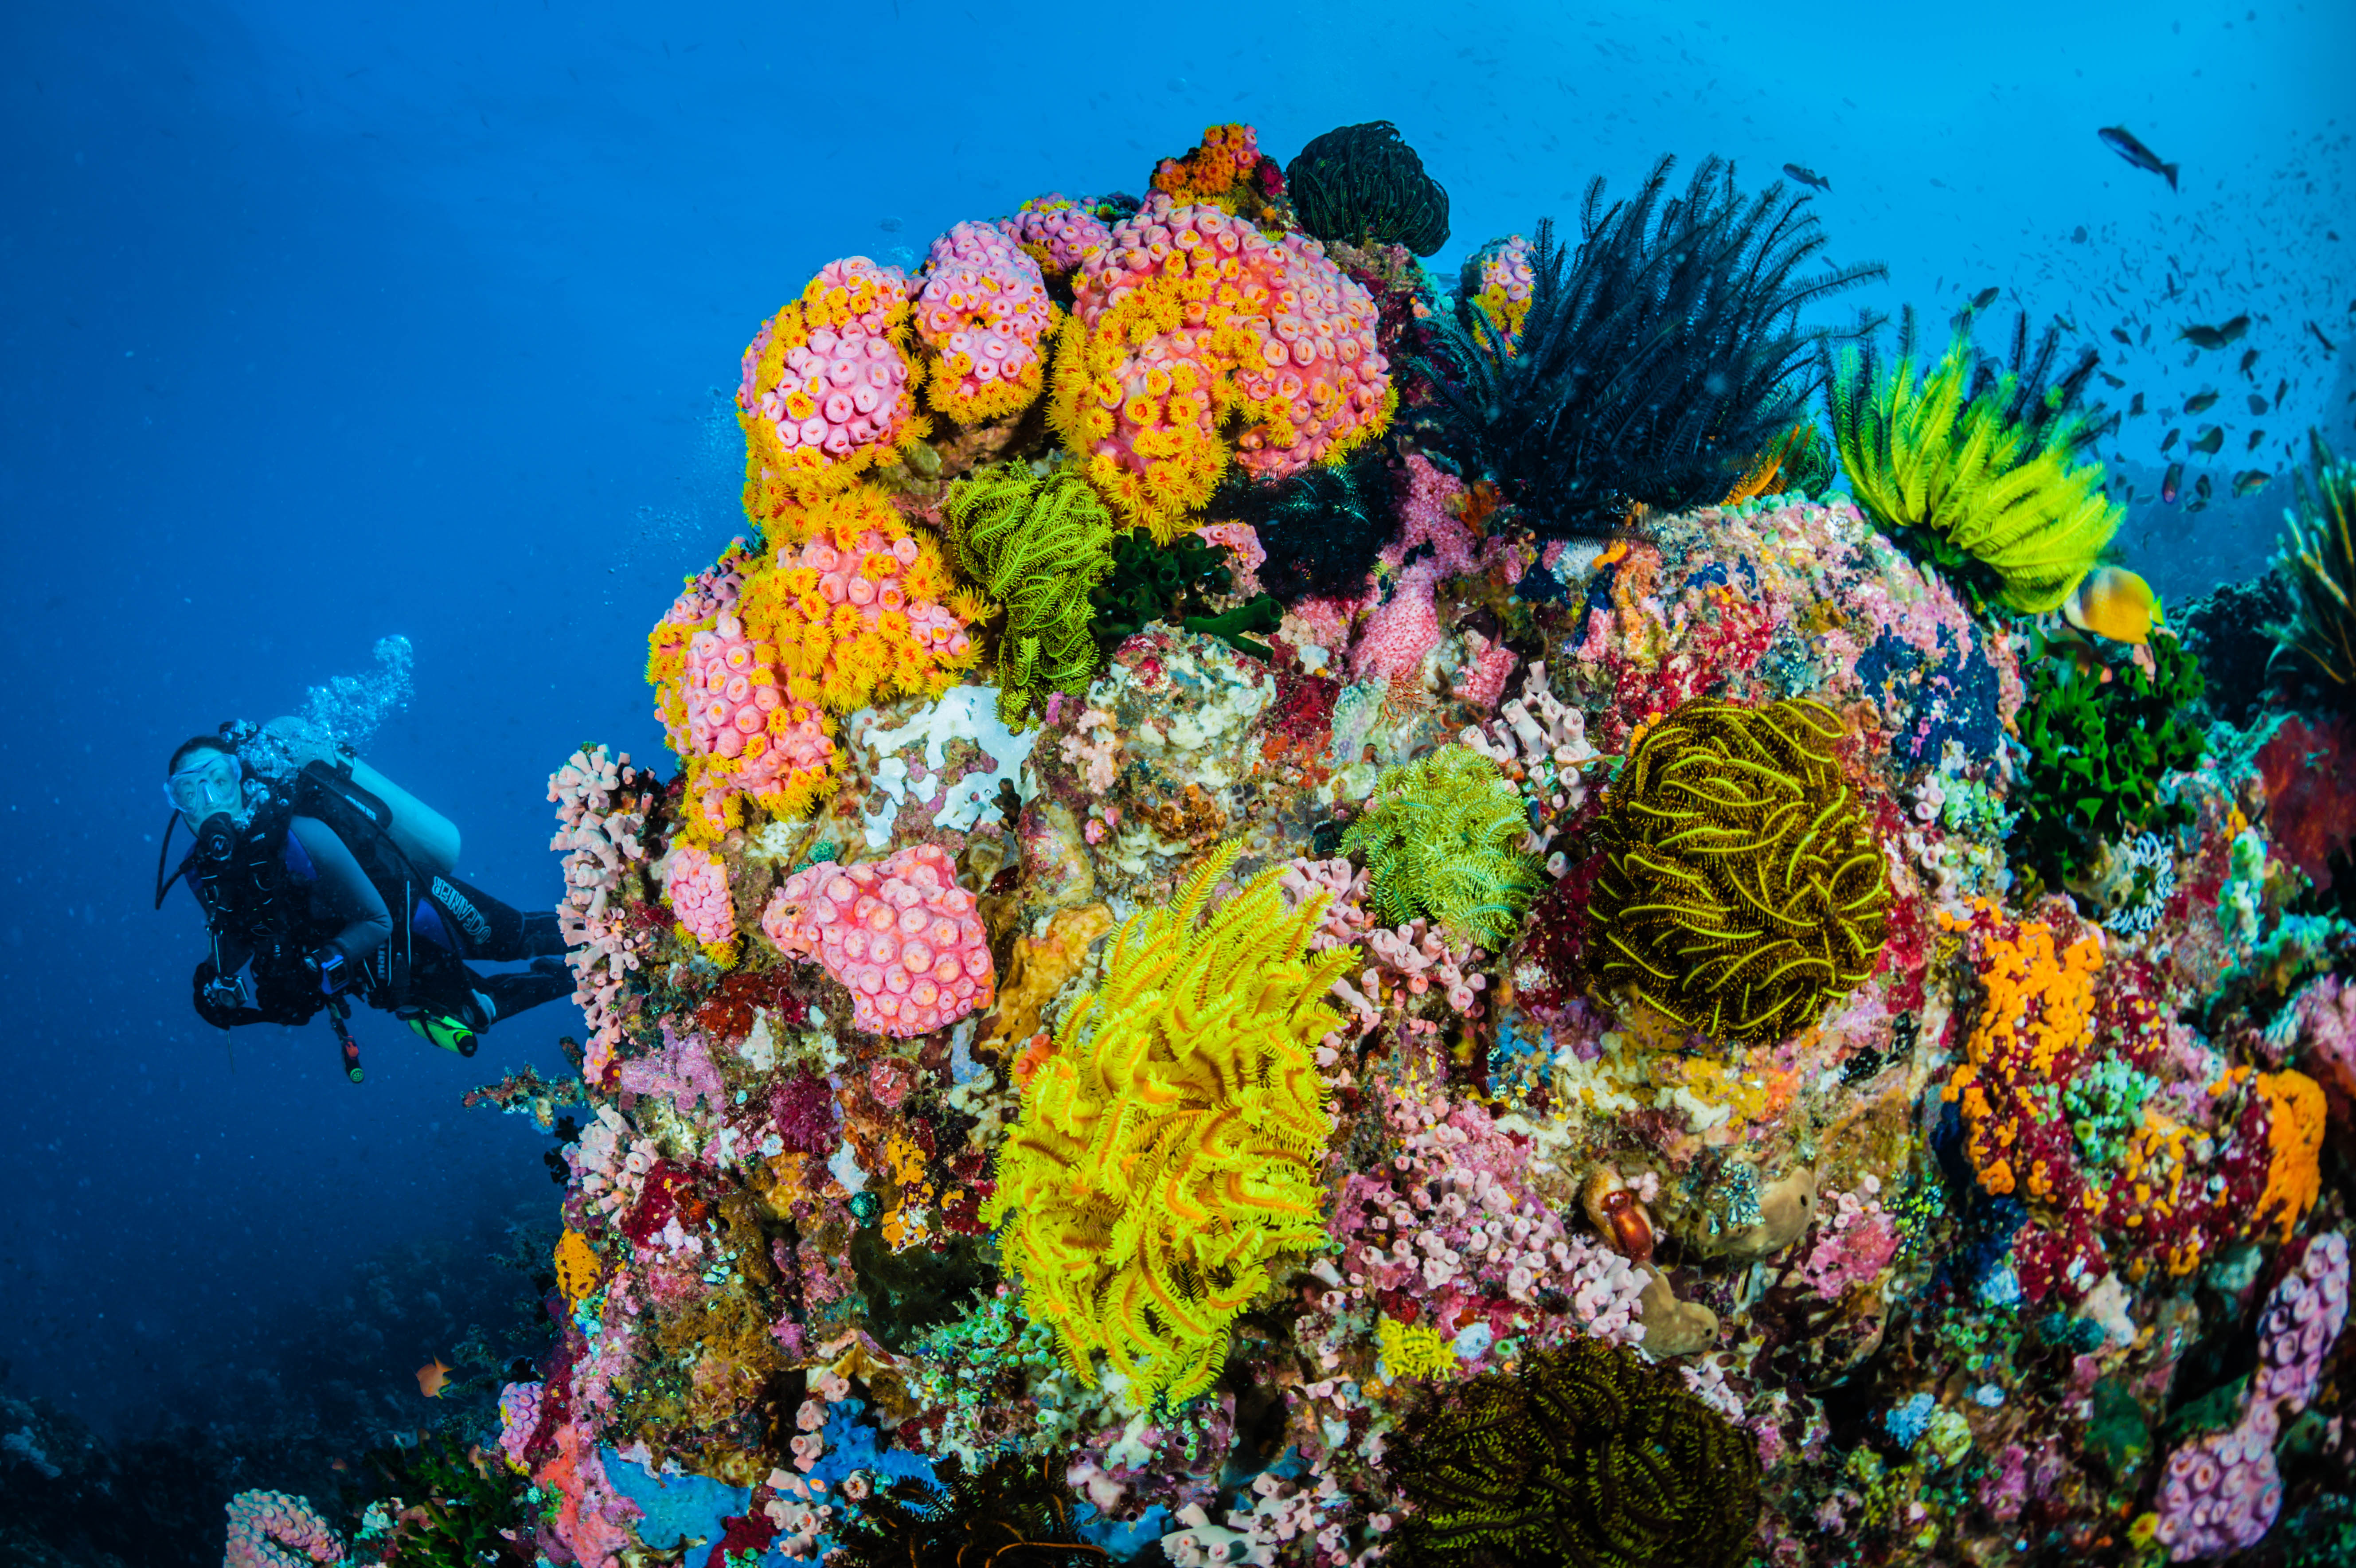 Scuba diving looking at a very colourful healthy coral reef